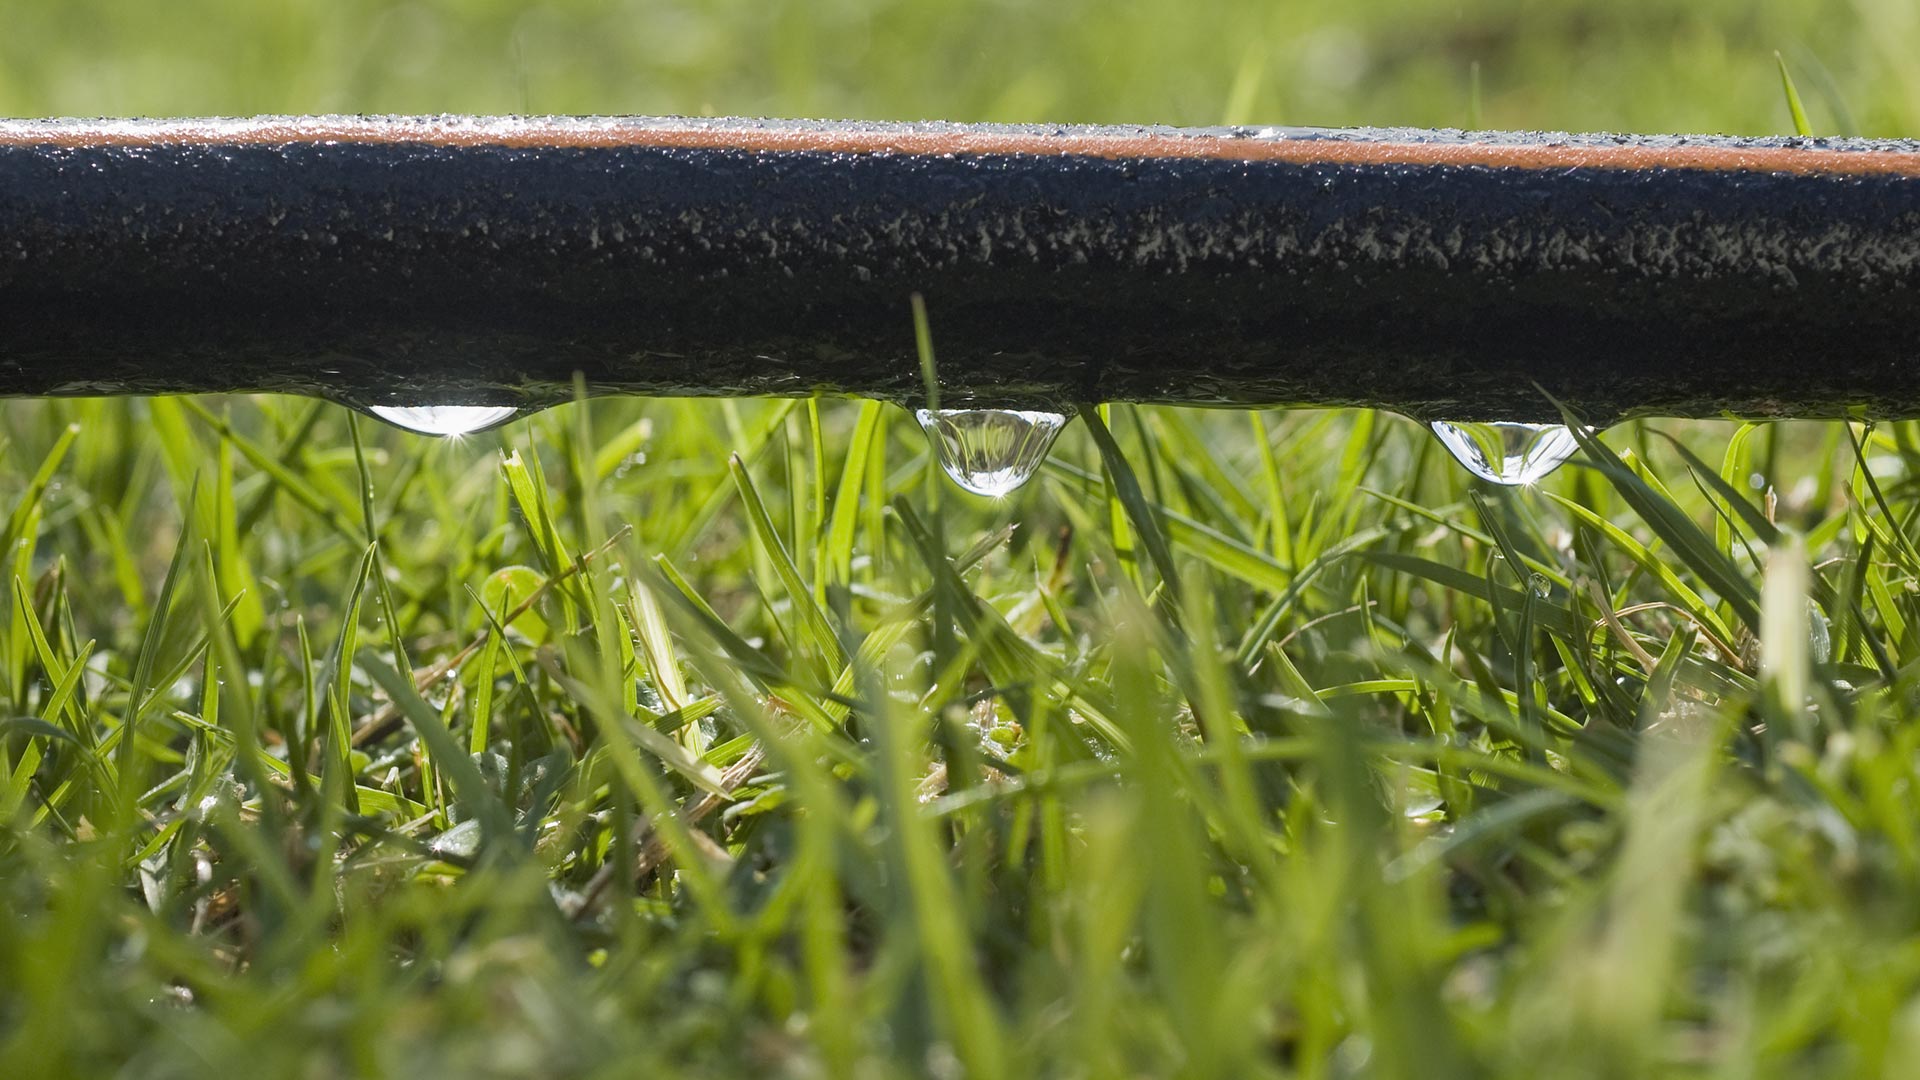 Drip vs Sprinkler Irrigation Systems - Which One Is the Better Option?